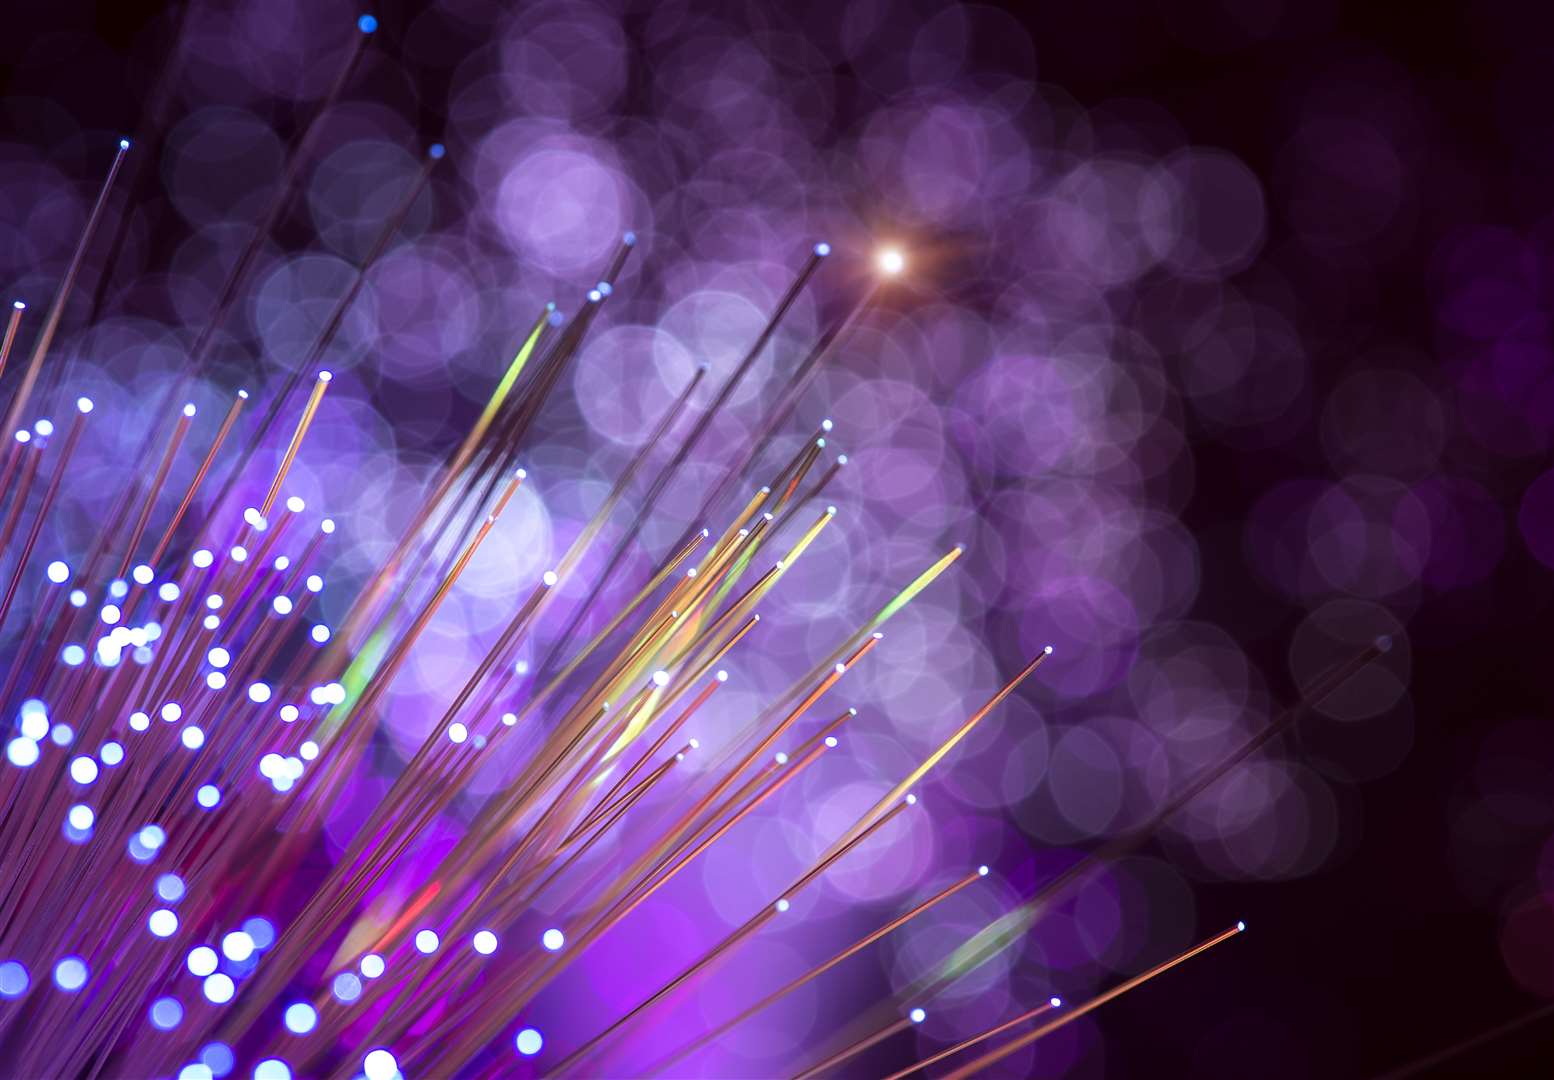 A full-fibre platform being constructed in Medway is set to provide the fastest ever internet speeds with Vfast saying it will transform digital connectivity